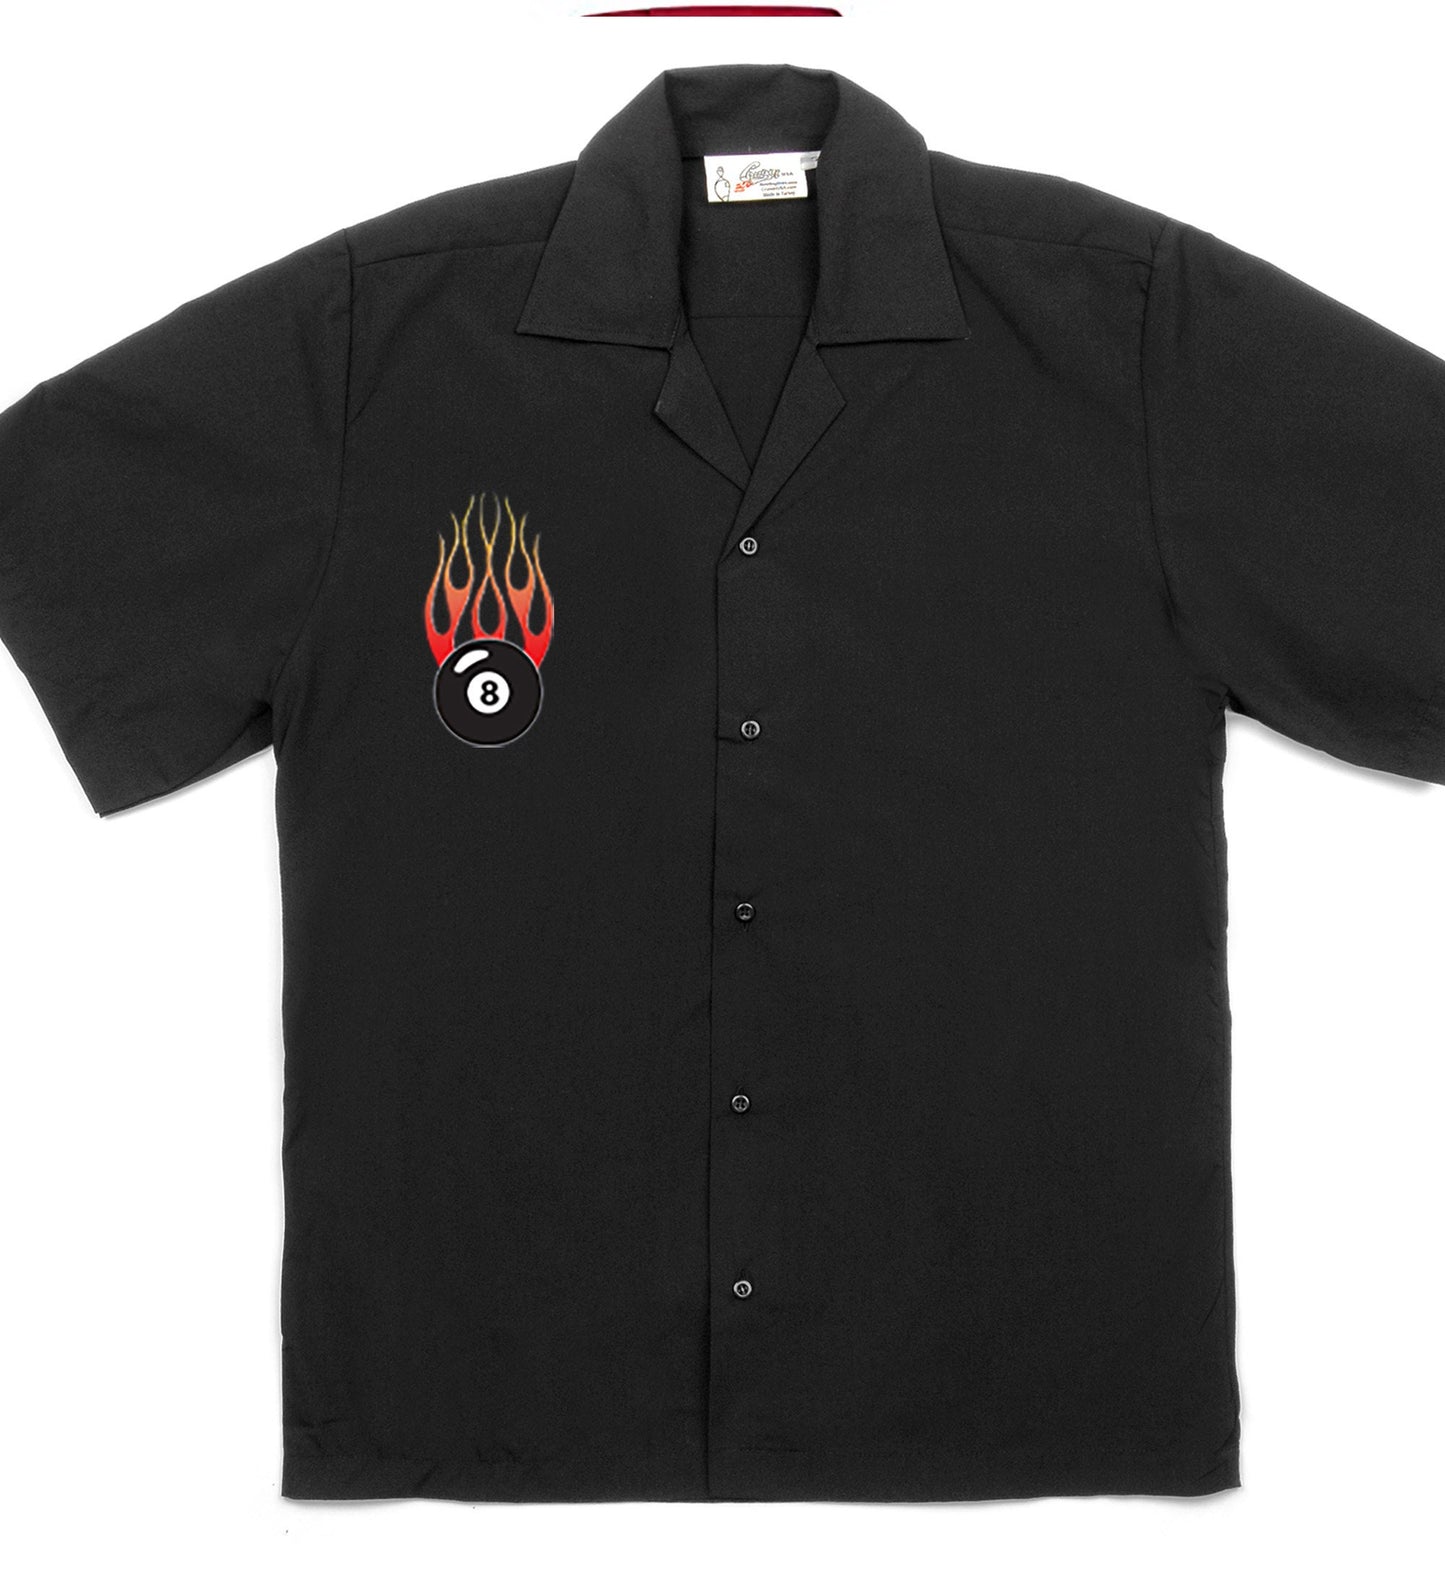 Flaming 8 Ball Classic Retro Bowling Shirt- Vintage Bowler ( Closeout) in multiple colors  - Includes Embroidered Name #232